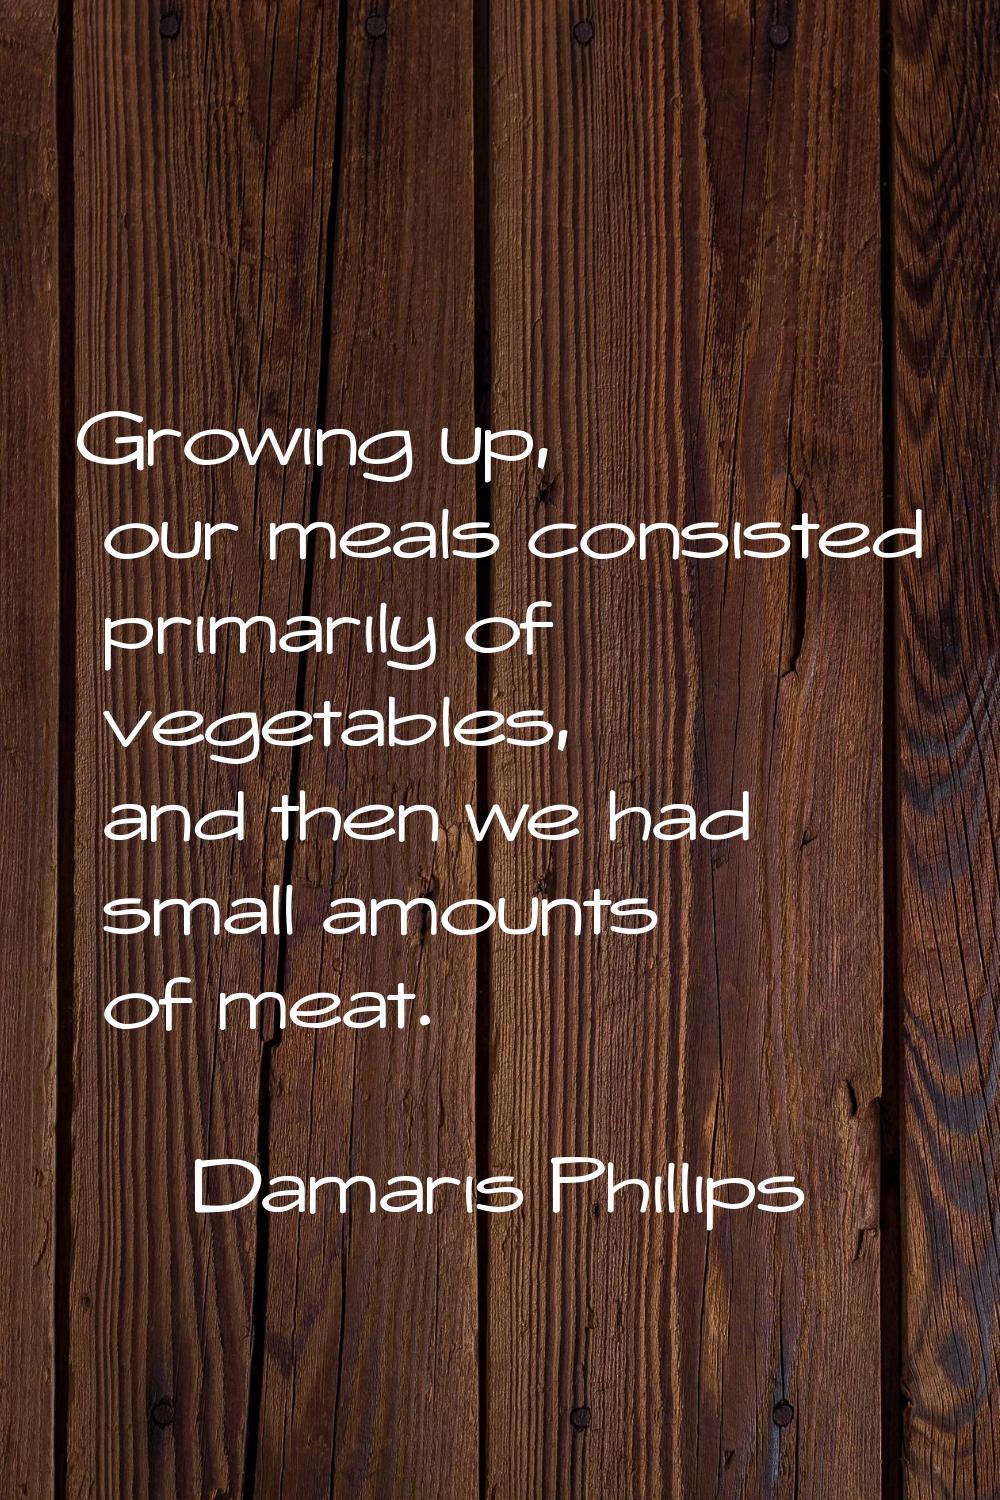 Growing up, our meals consisted primarily of vegetables, and then we had small amounts of meat.